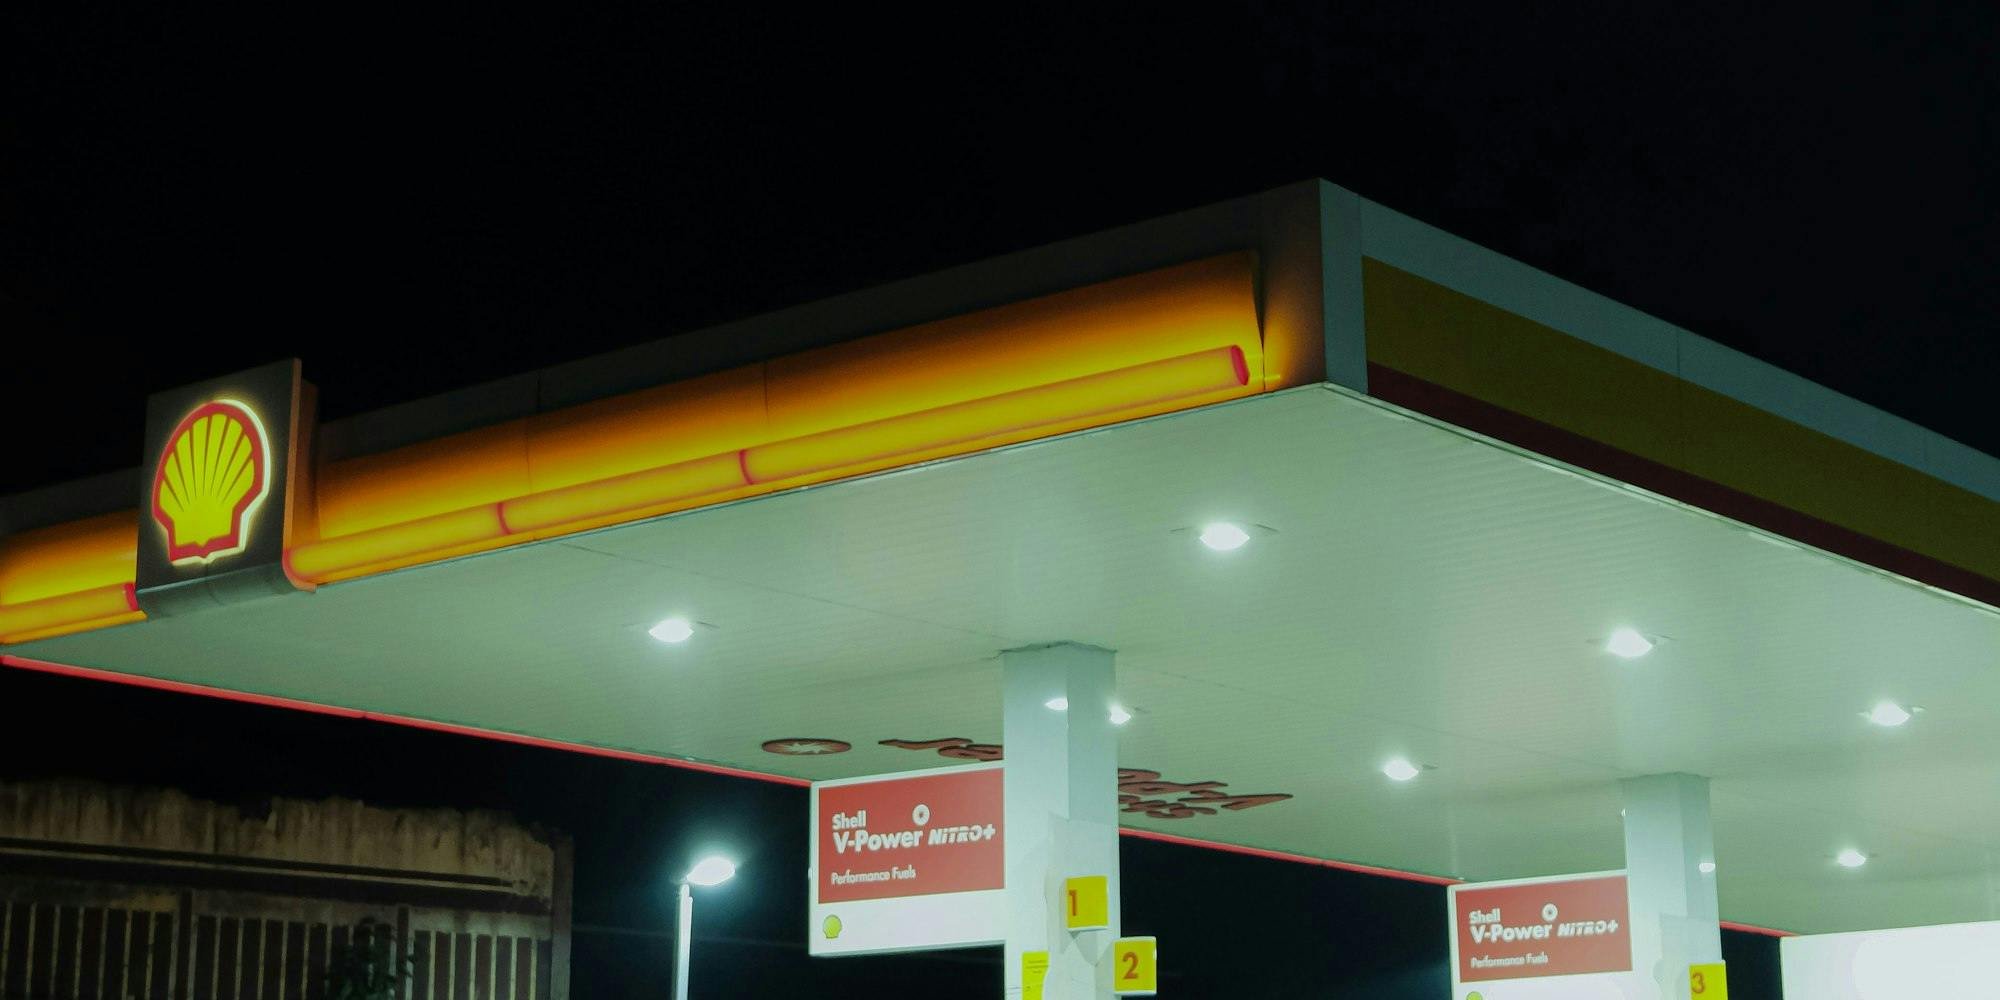 Northern California Shell Station - Funded within 7 days